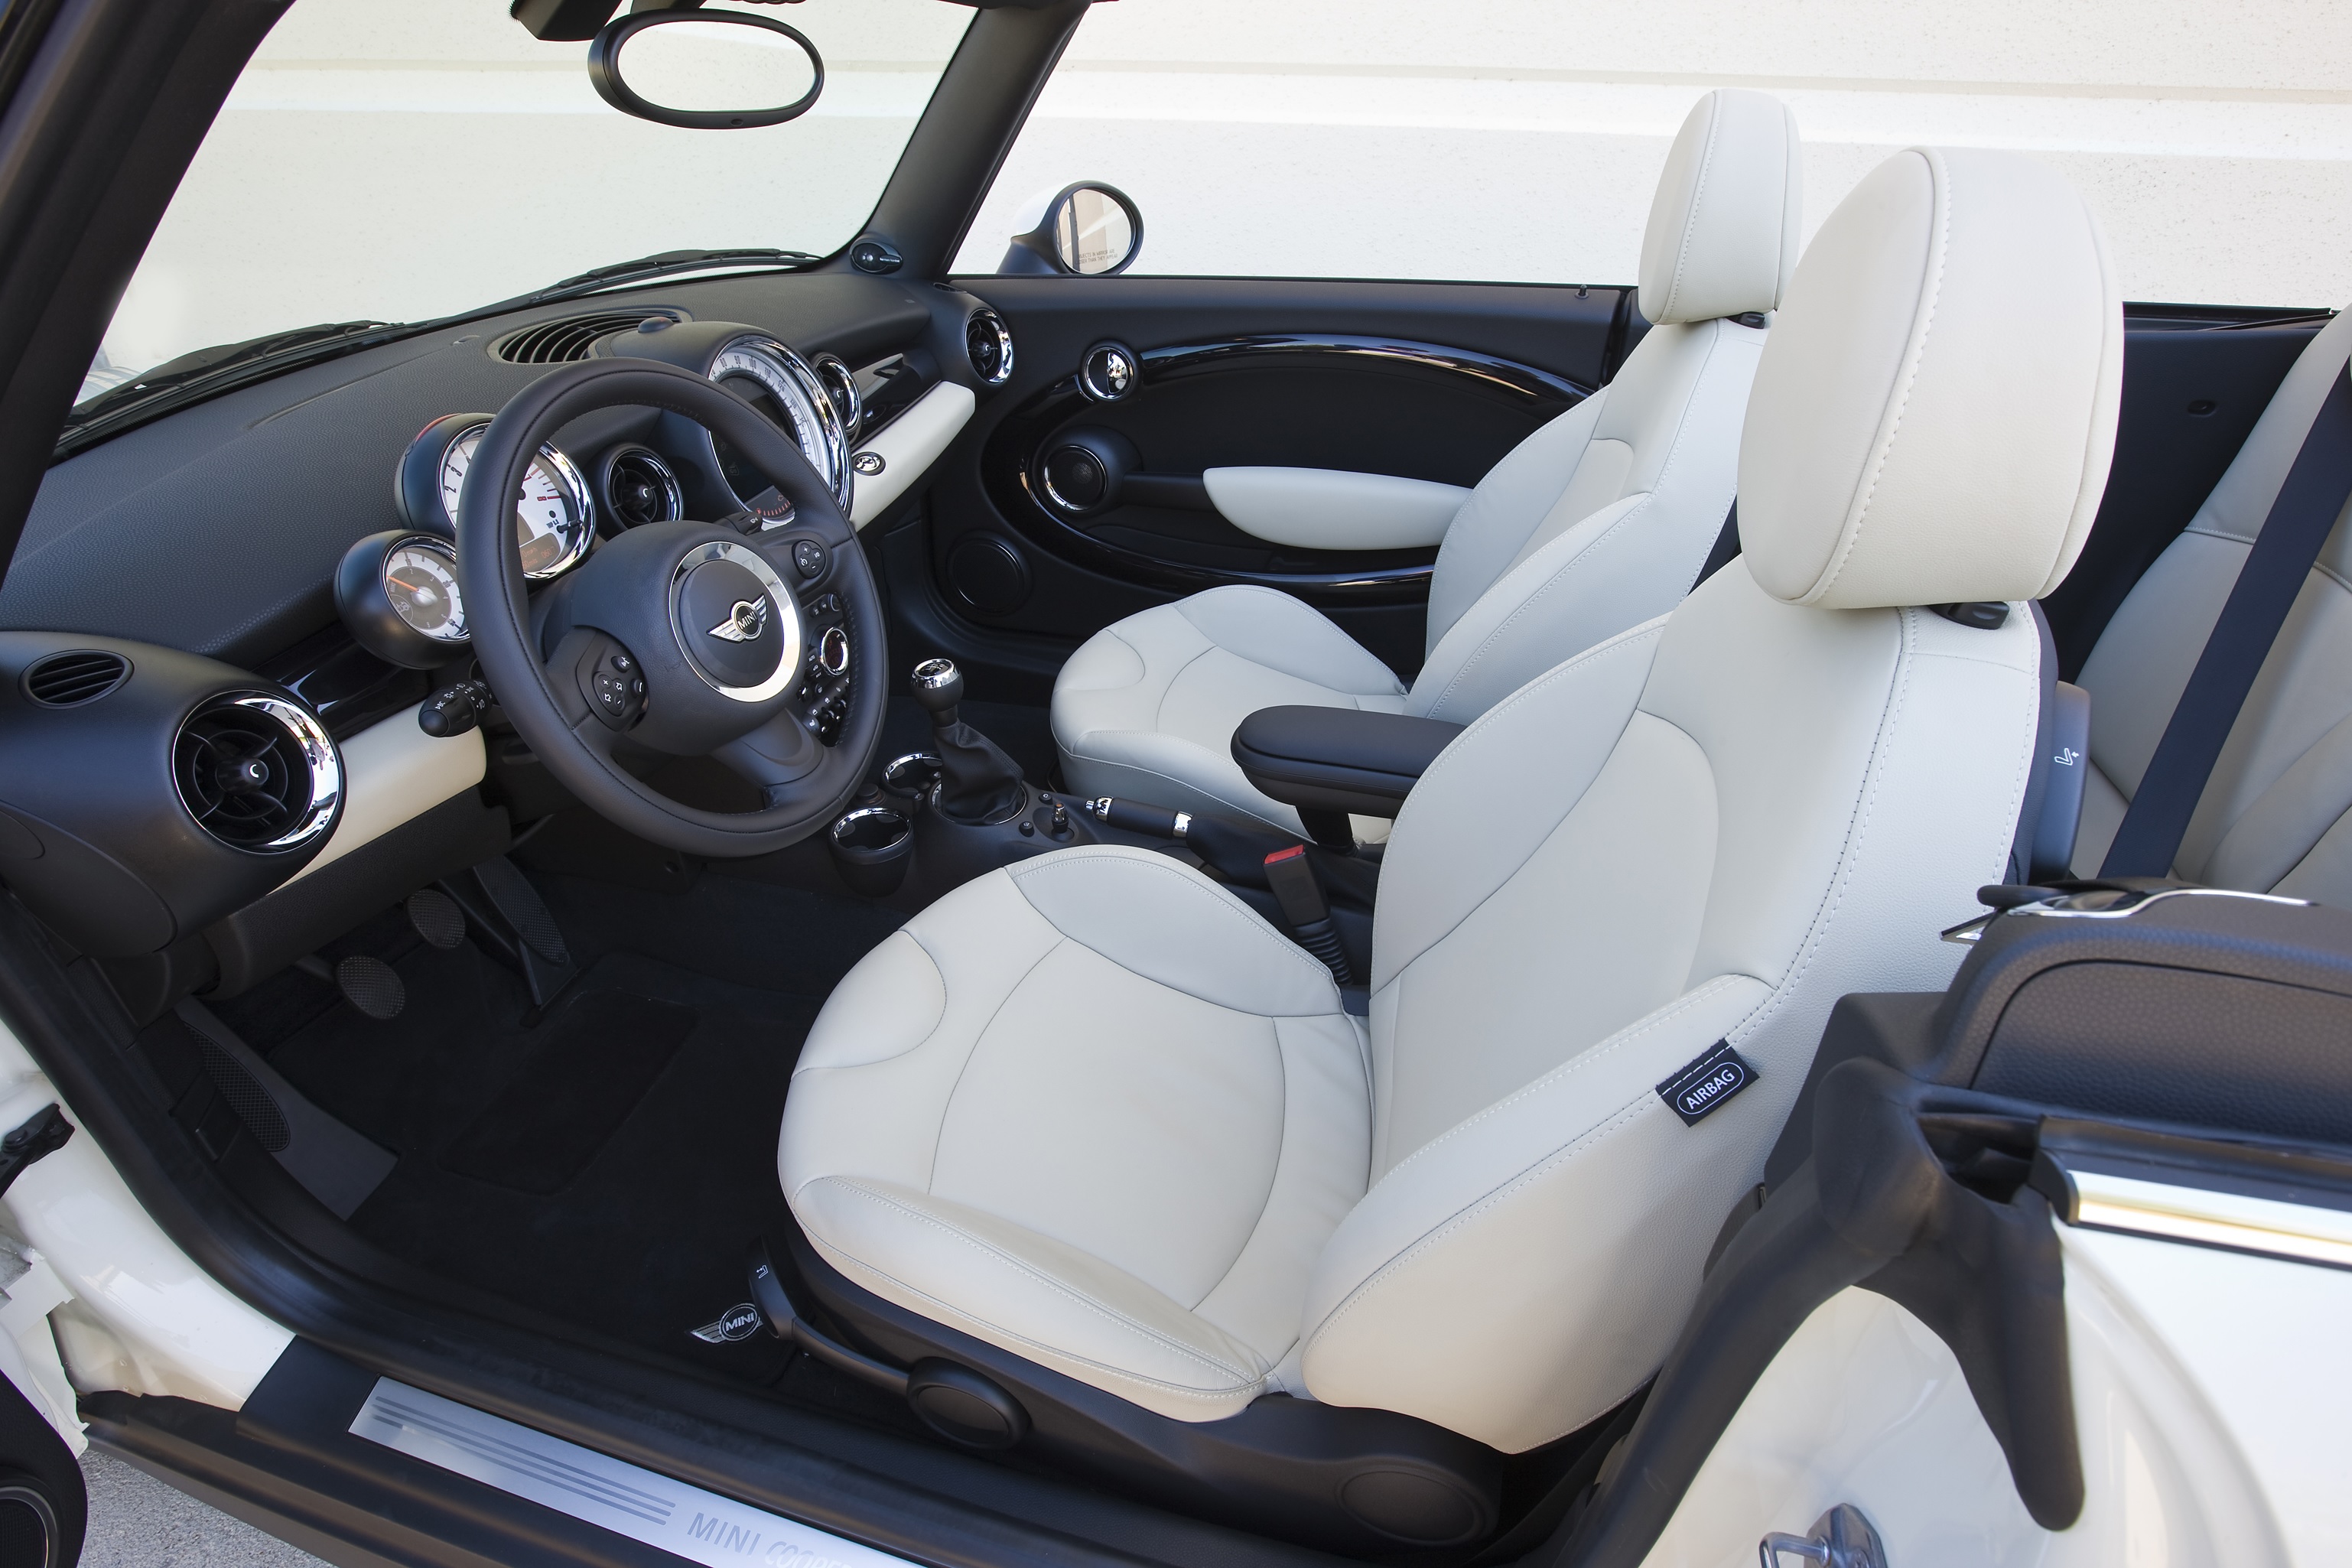 The white-leather seats and black dashboard of a white 2011 R57 Mini Cooper Convertible